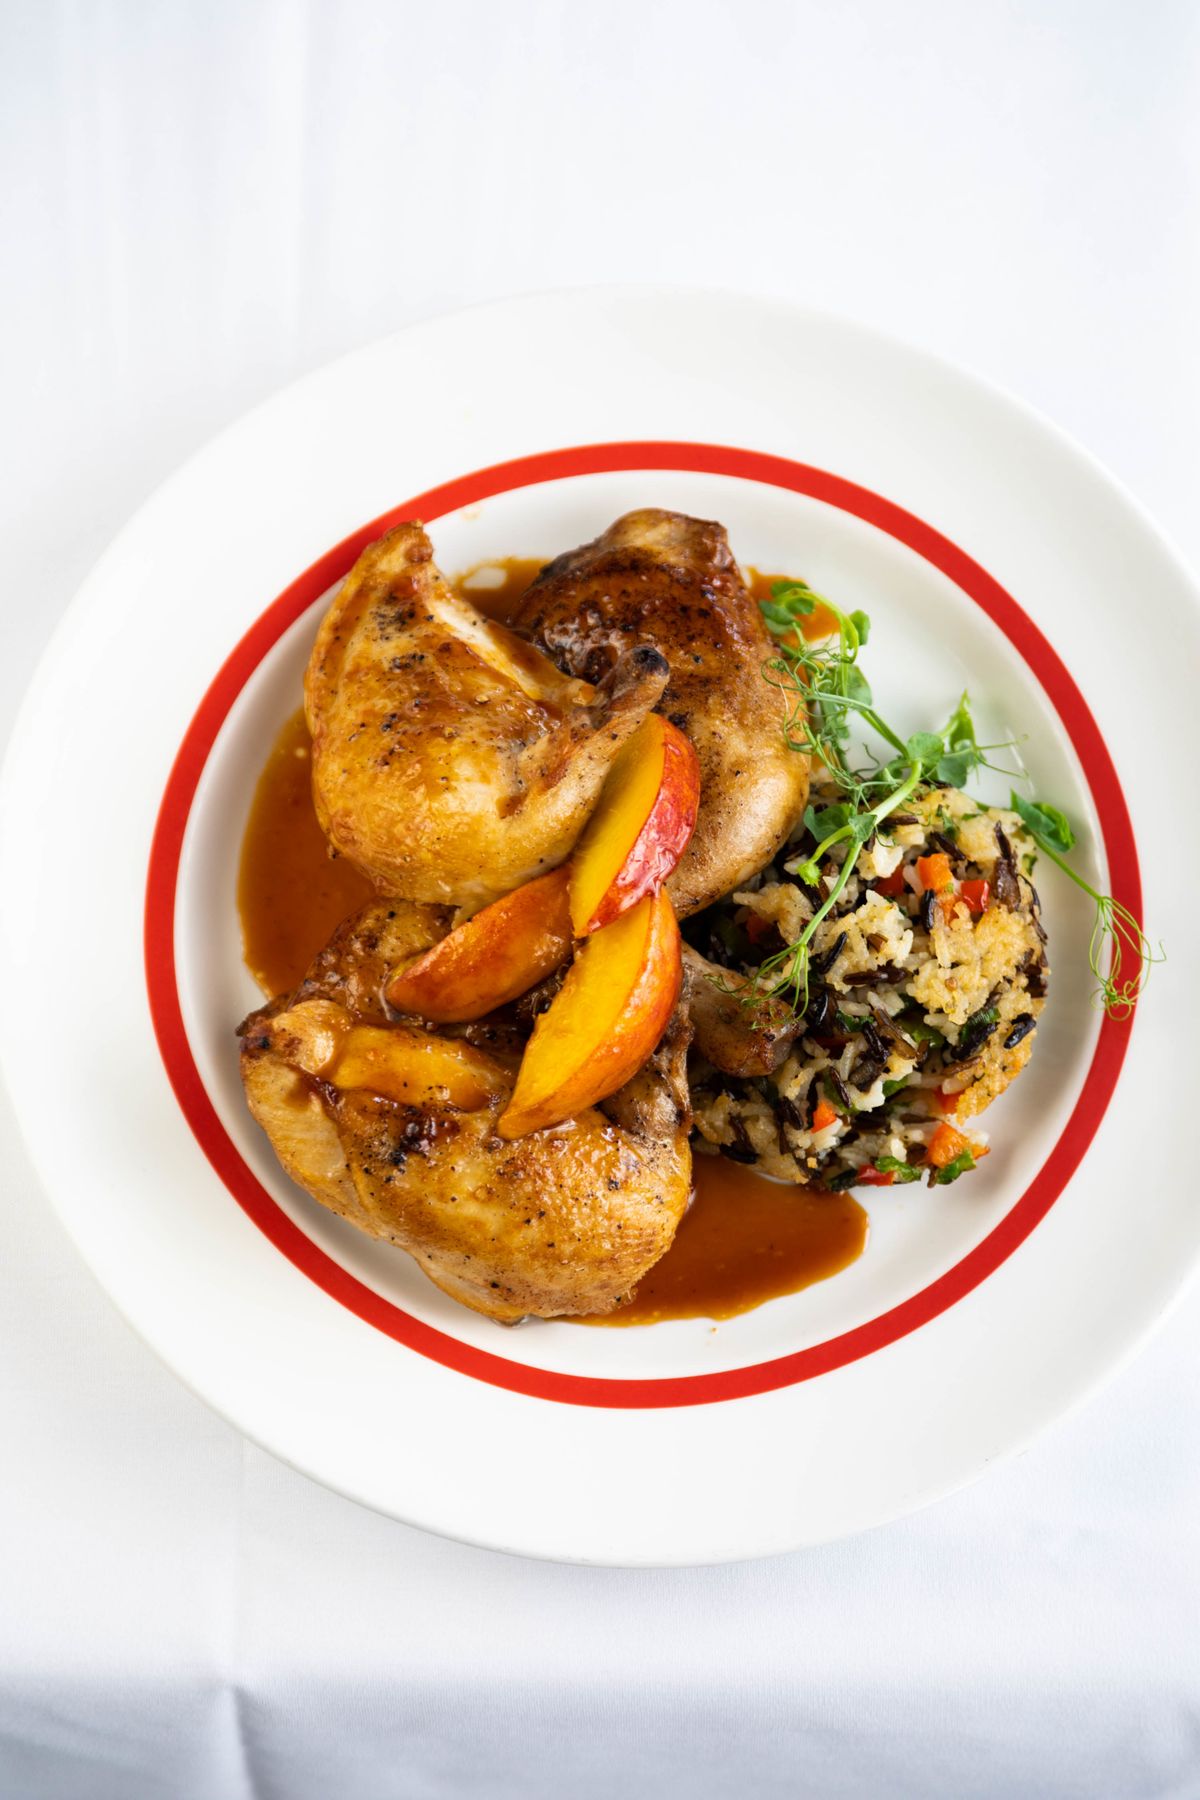 Cornish Game Hen. A Taste Of Arnaud's With Chef Tommy DiGiovanni.